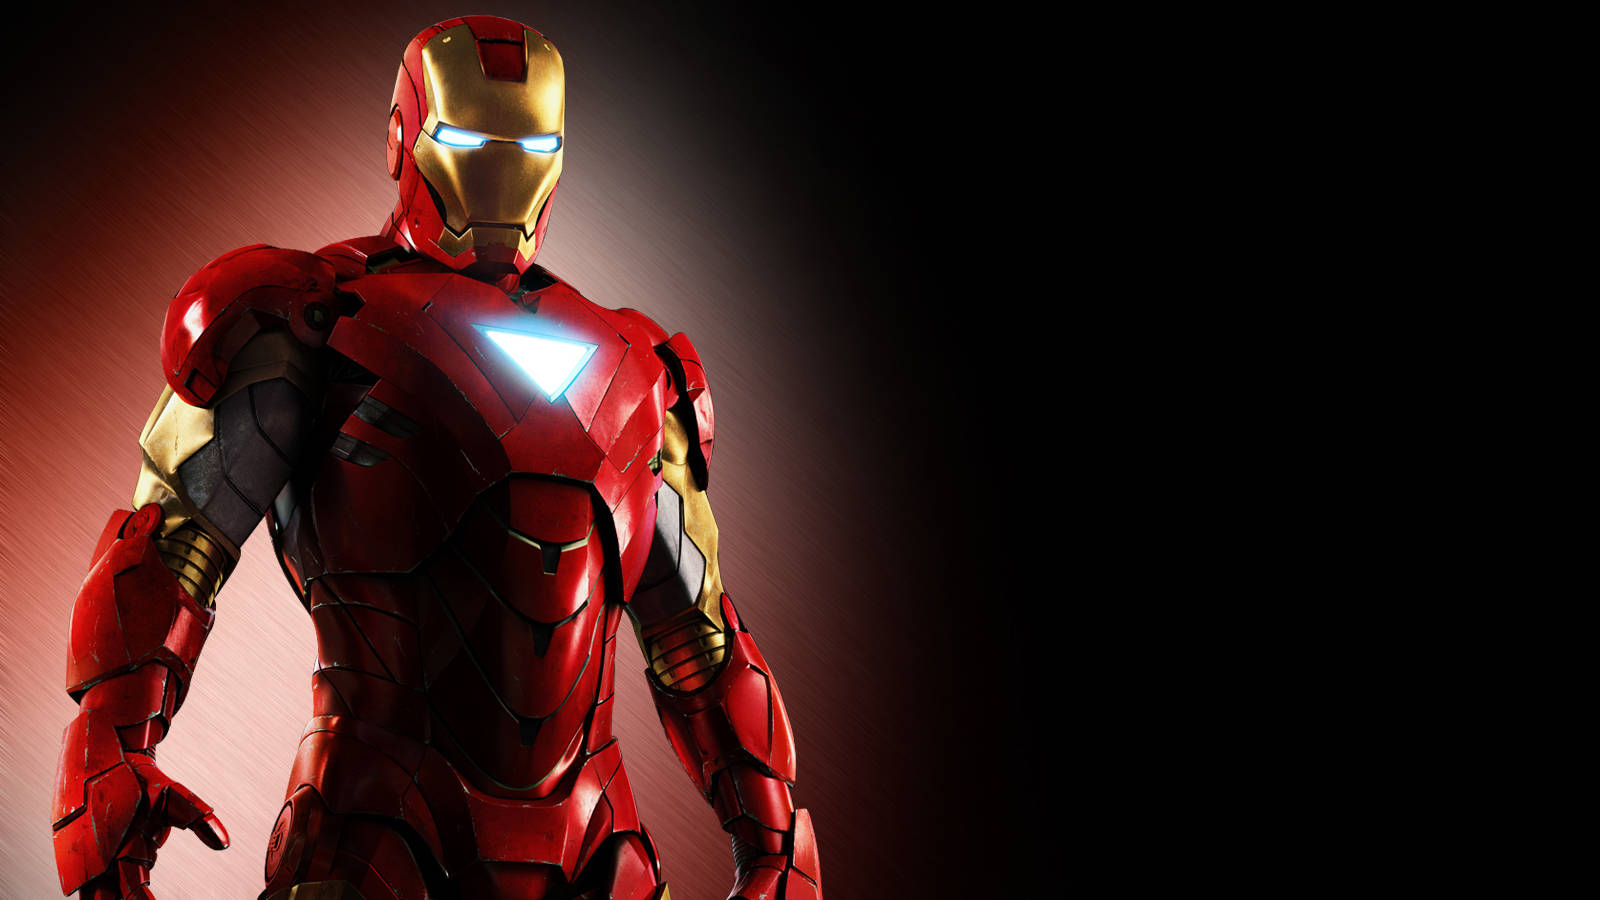 Cool Ironman Wallpapers #6987311